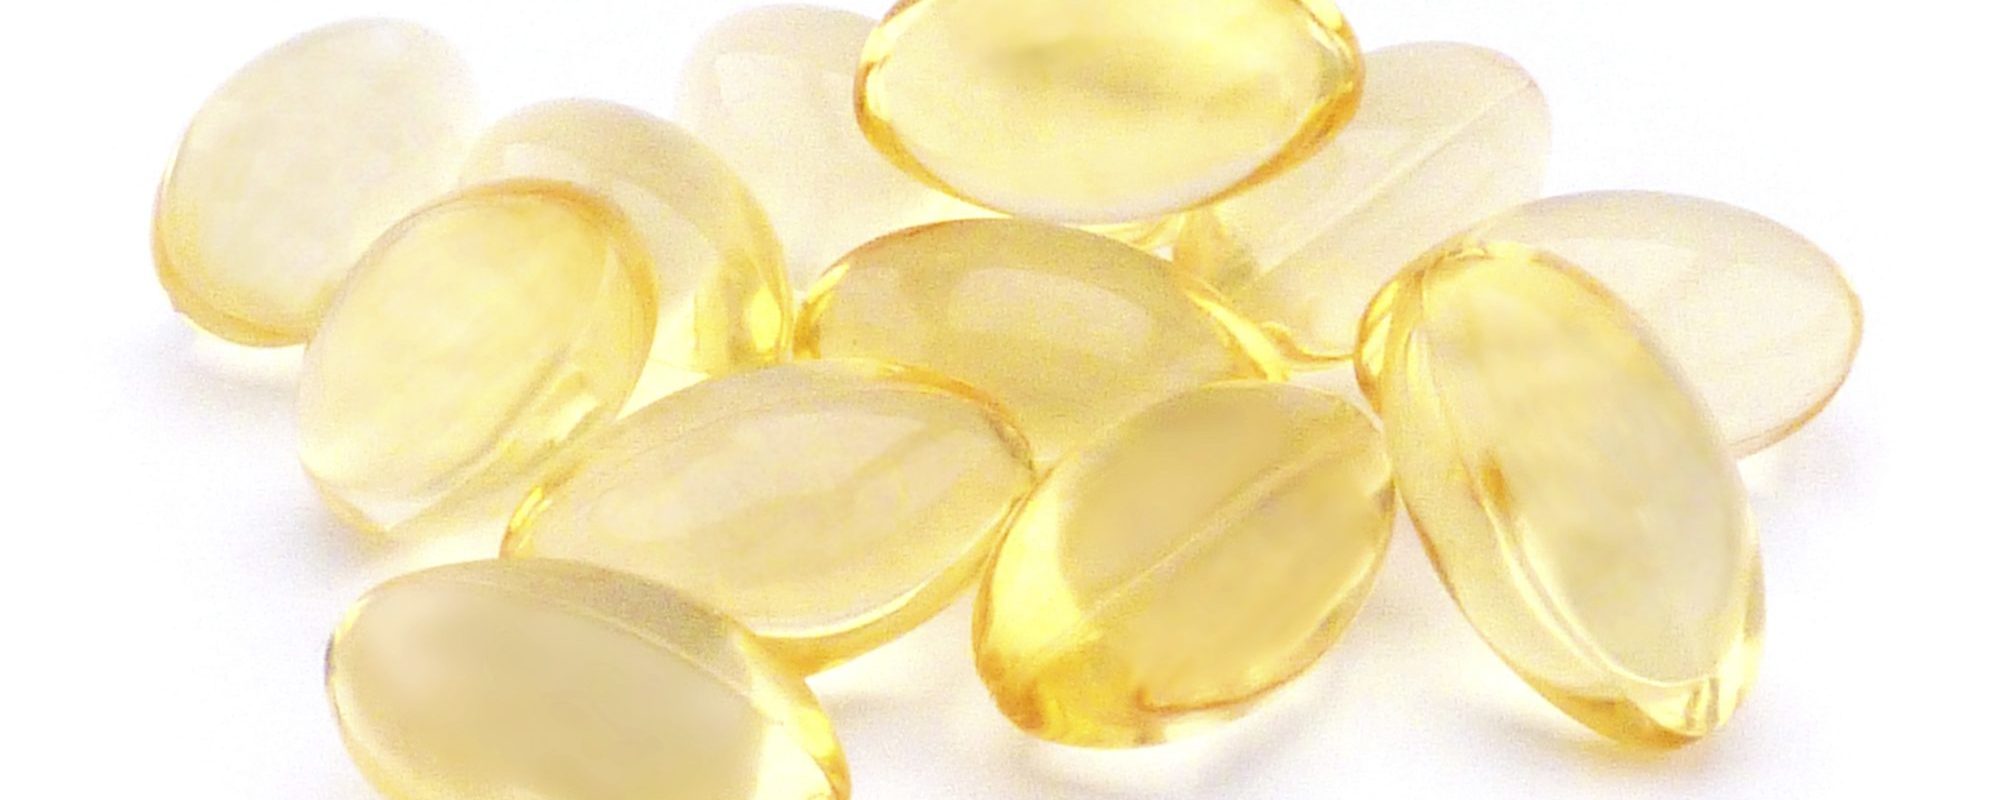 Why Vitamin D Levels Matter in Patients with Rheumatic Disease